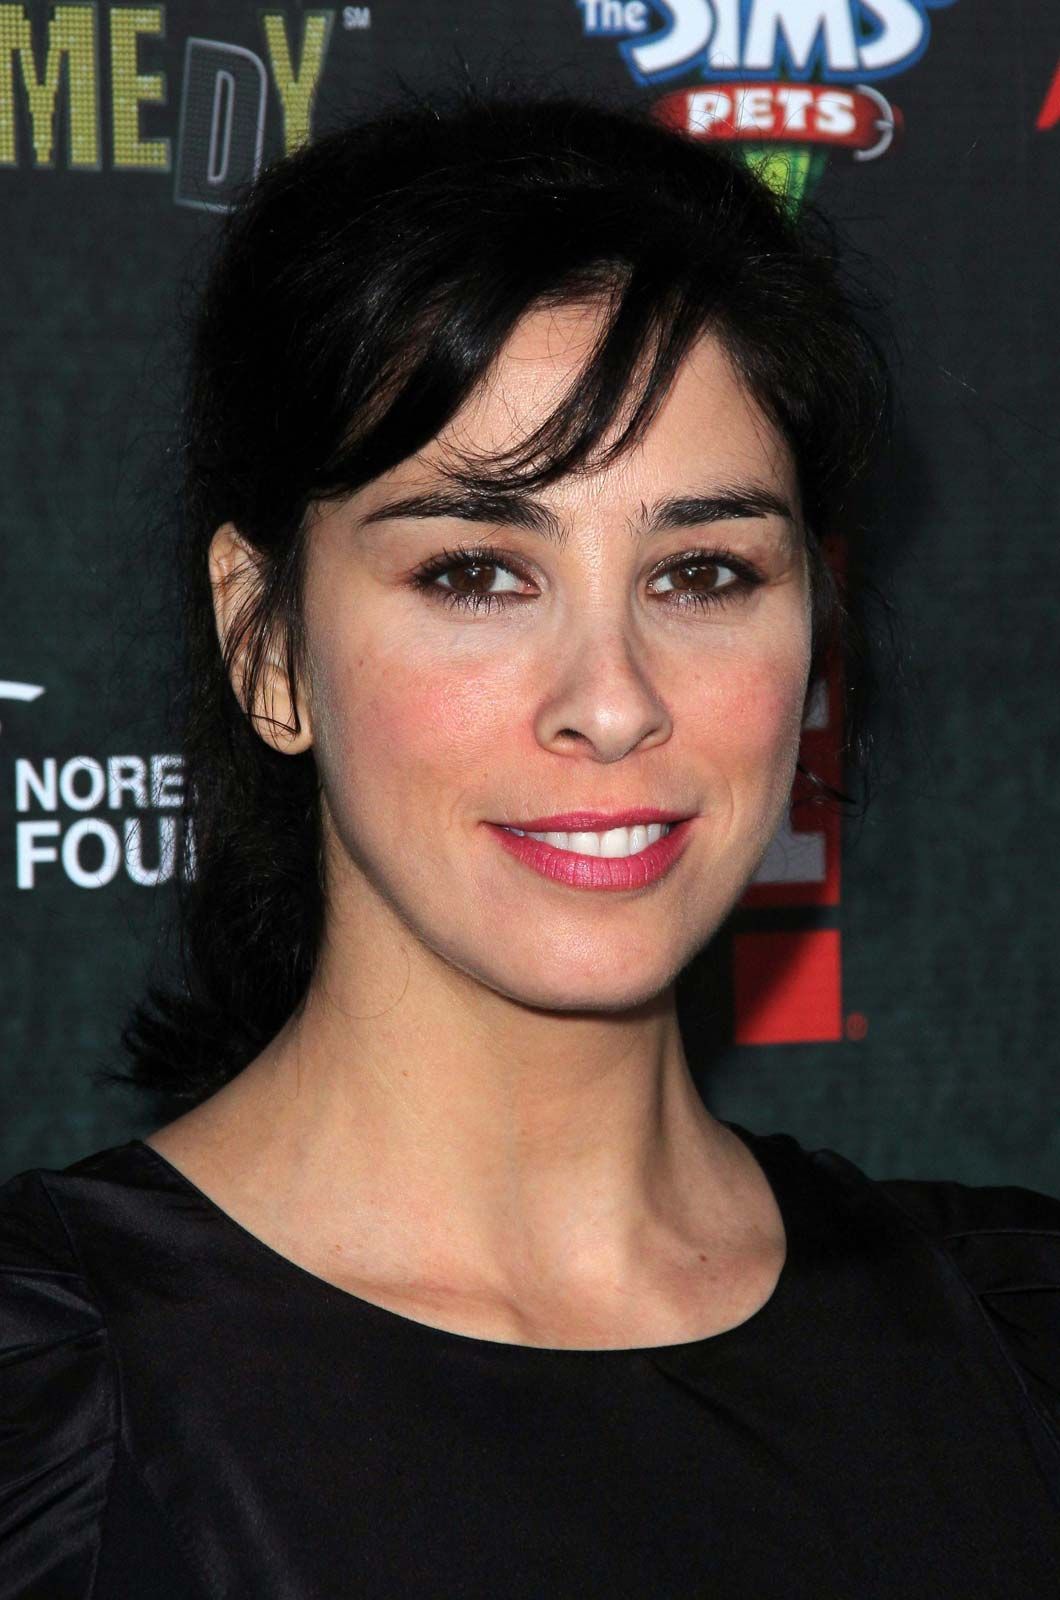 bridie clarke recommends pictures of sarah silverman pic